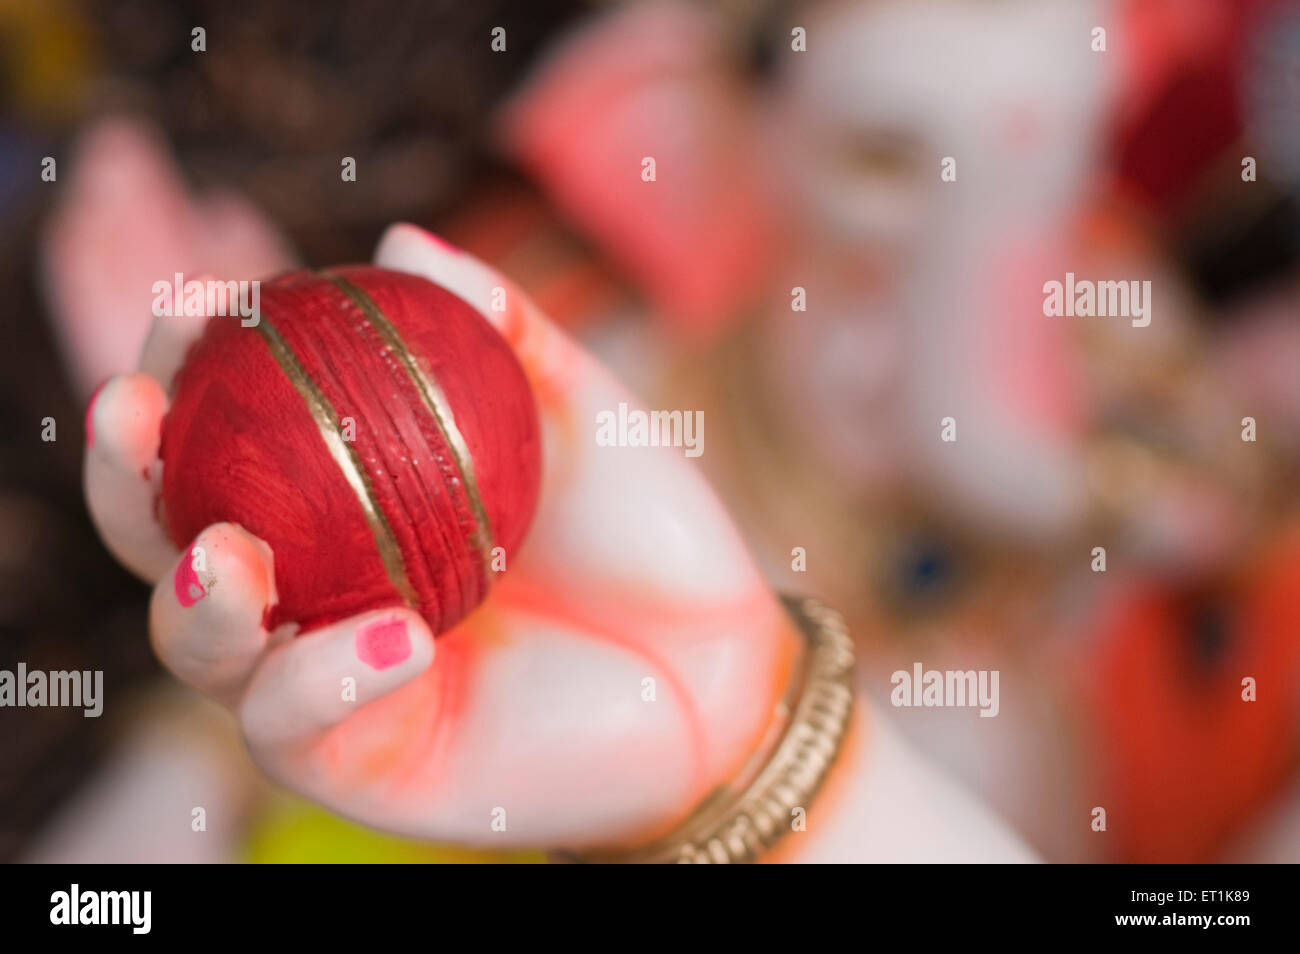 Red cricket ball in hands of Lord Ganesh Pune Maharashtra India Asia Sept 2011 Stock Photo